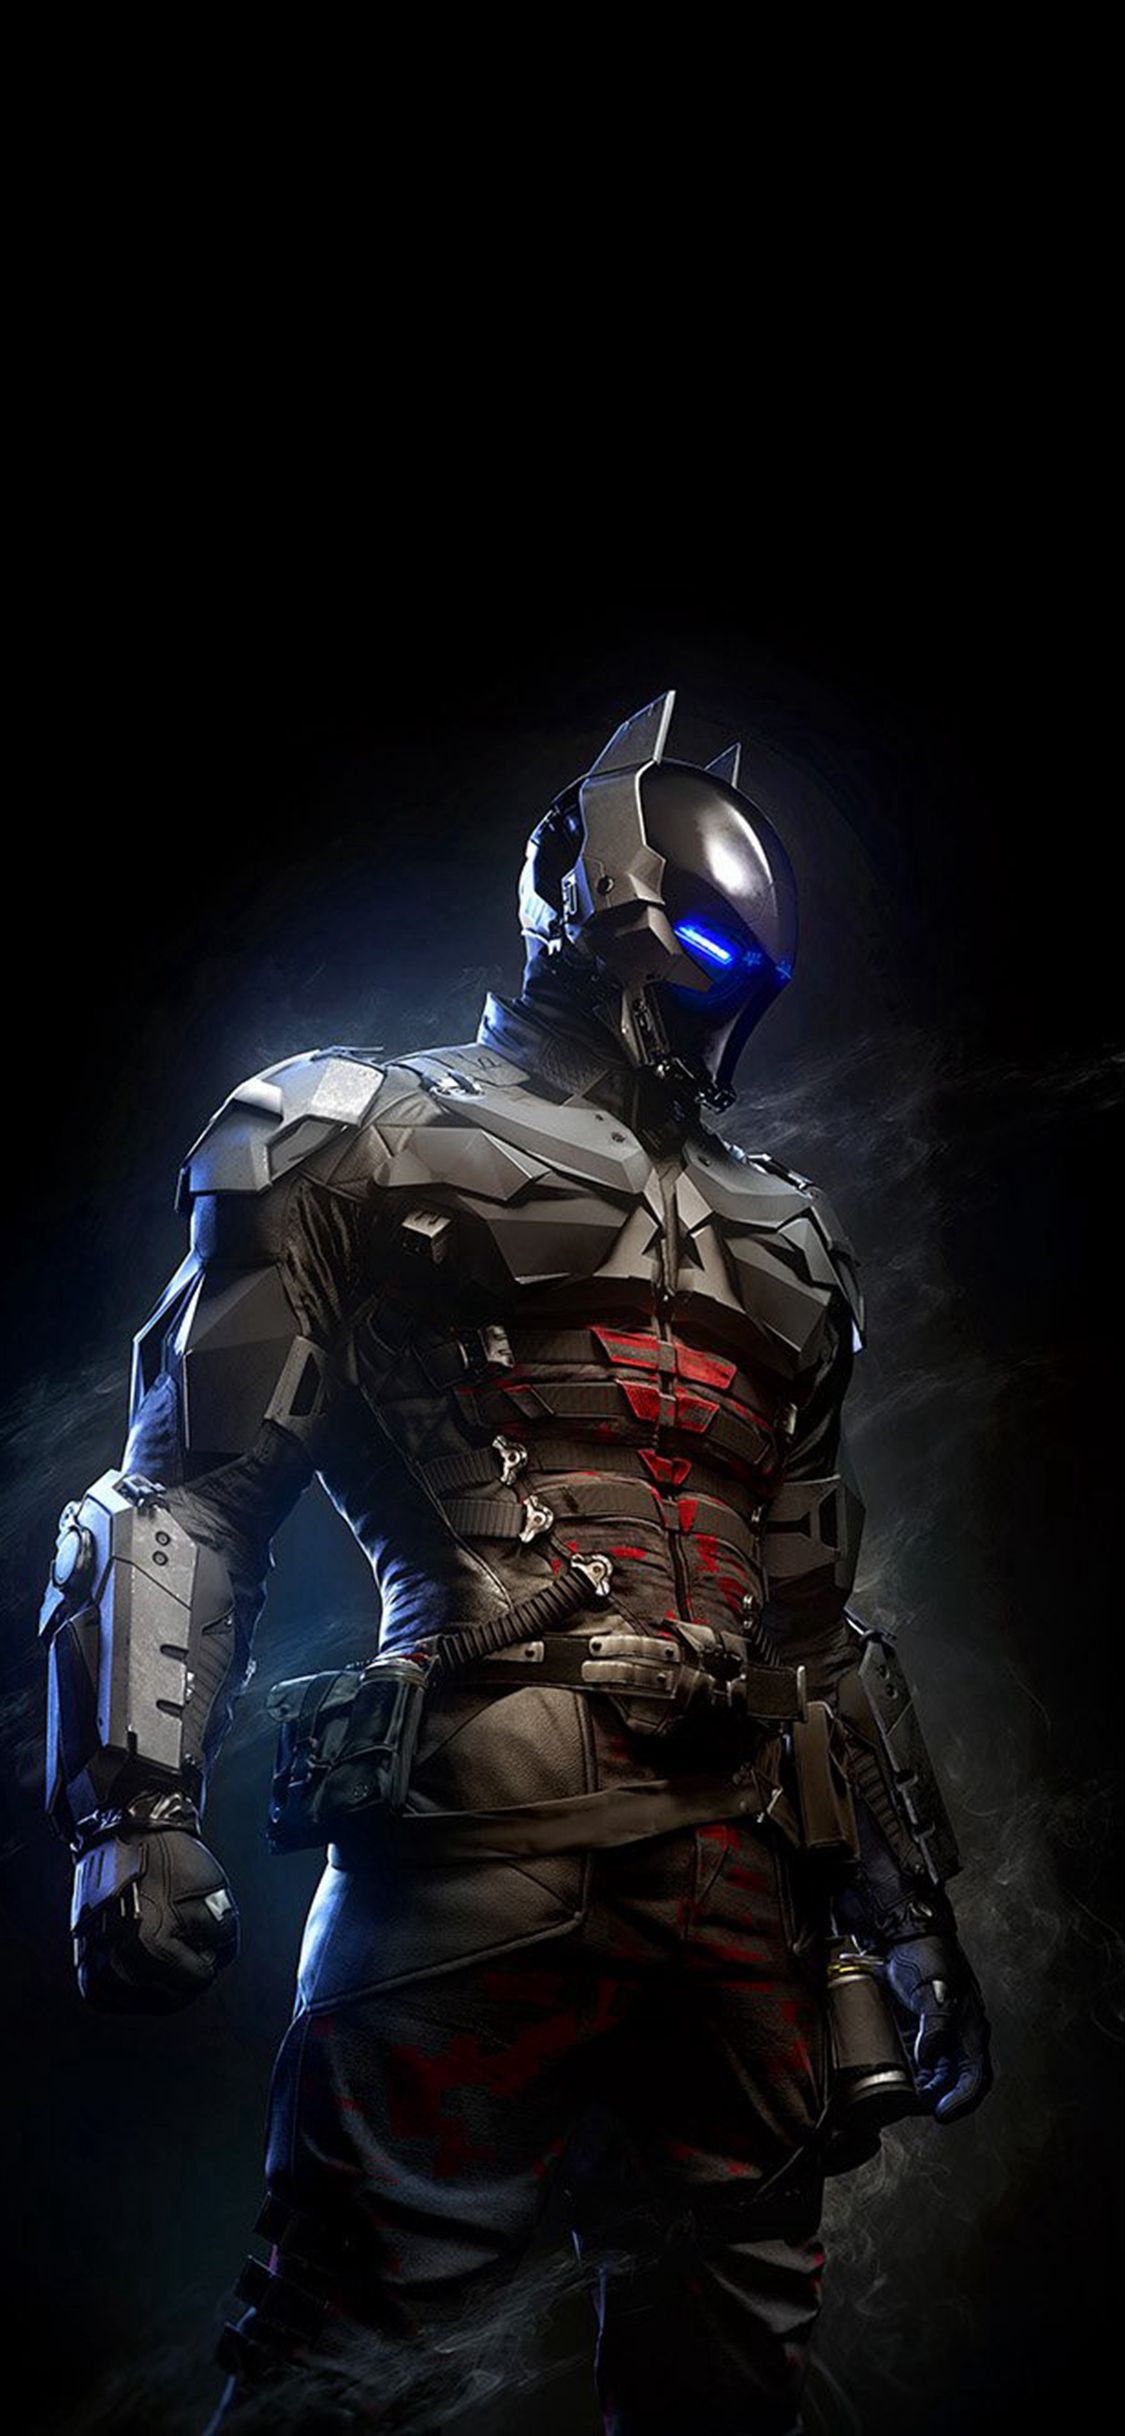 Batman Arkham Knight Body Armour iPhone X Wallpapers Free Download